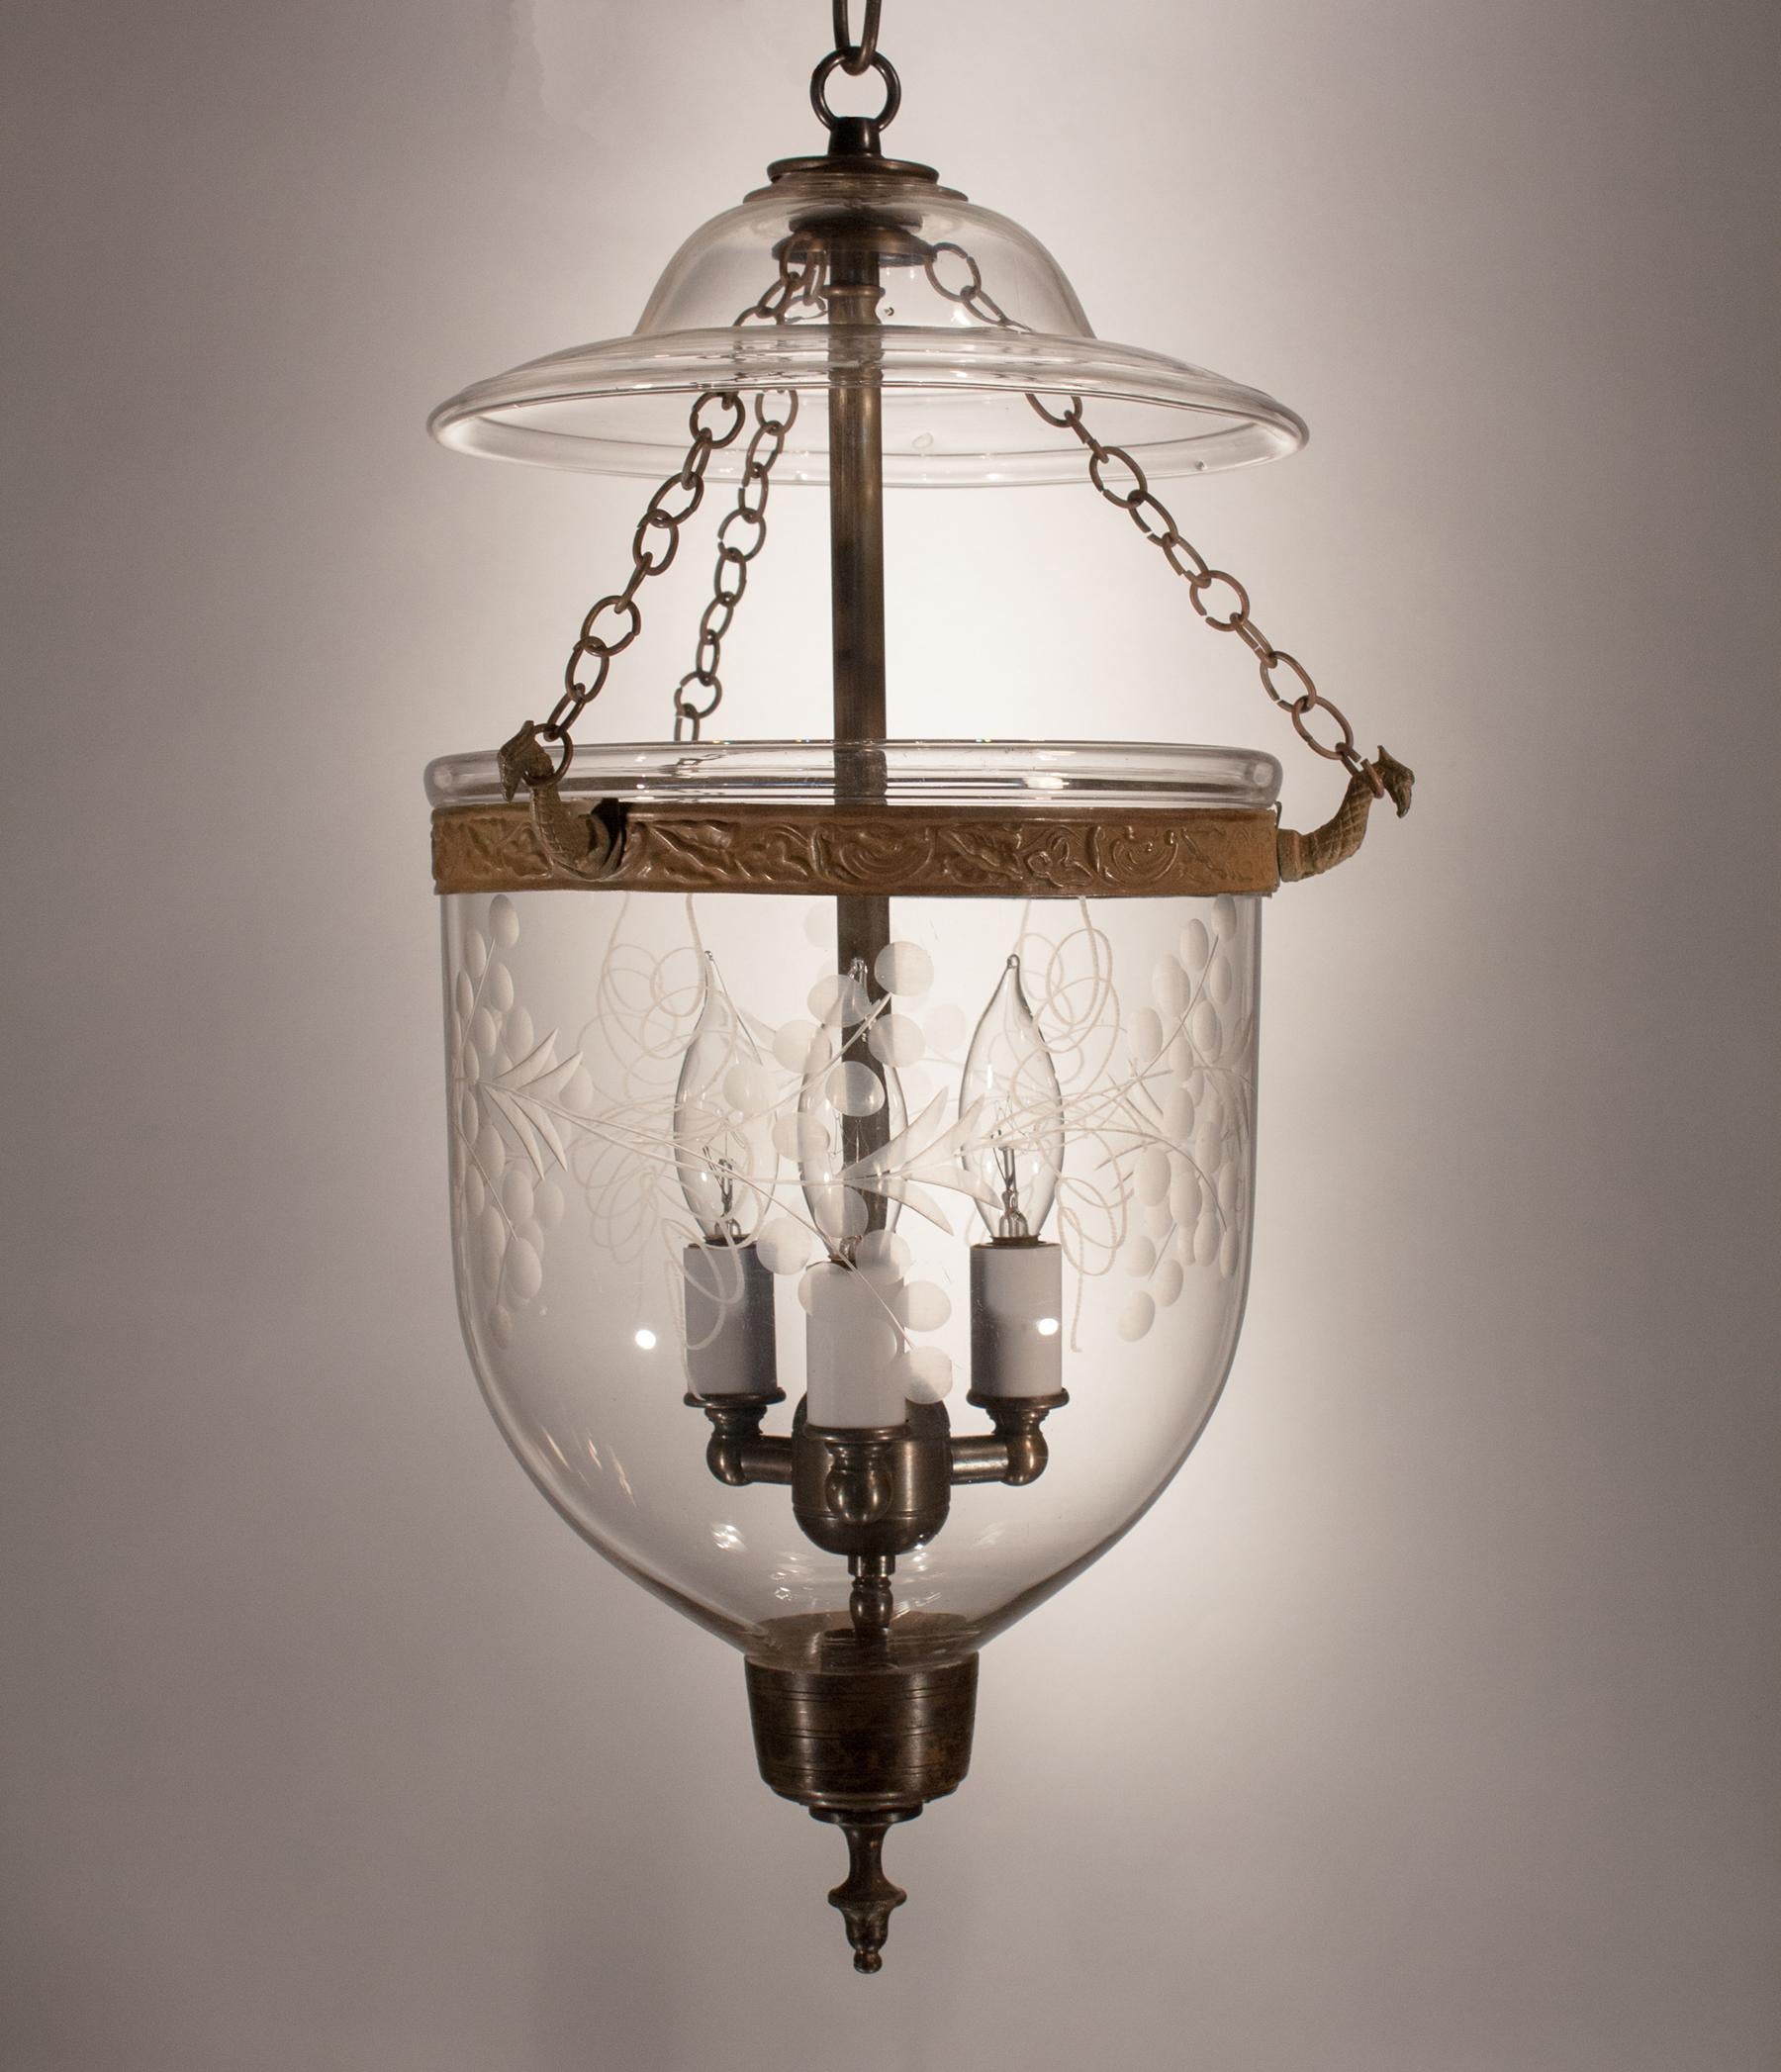 A lovely hand blown glass bell jar lantern with an etched vine motif. This petite antique pendant light is accented with its original brass band and finial candleholder base. The period smoke lid with a classic bell form further enhances the bell